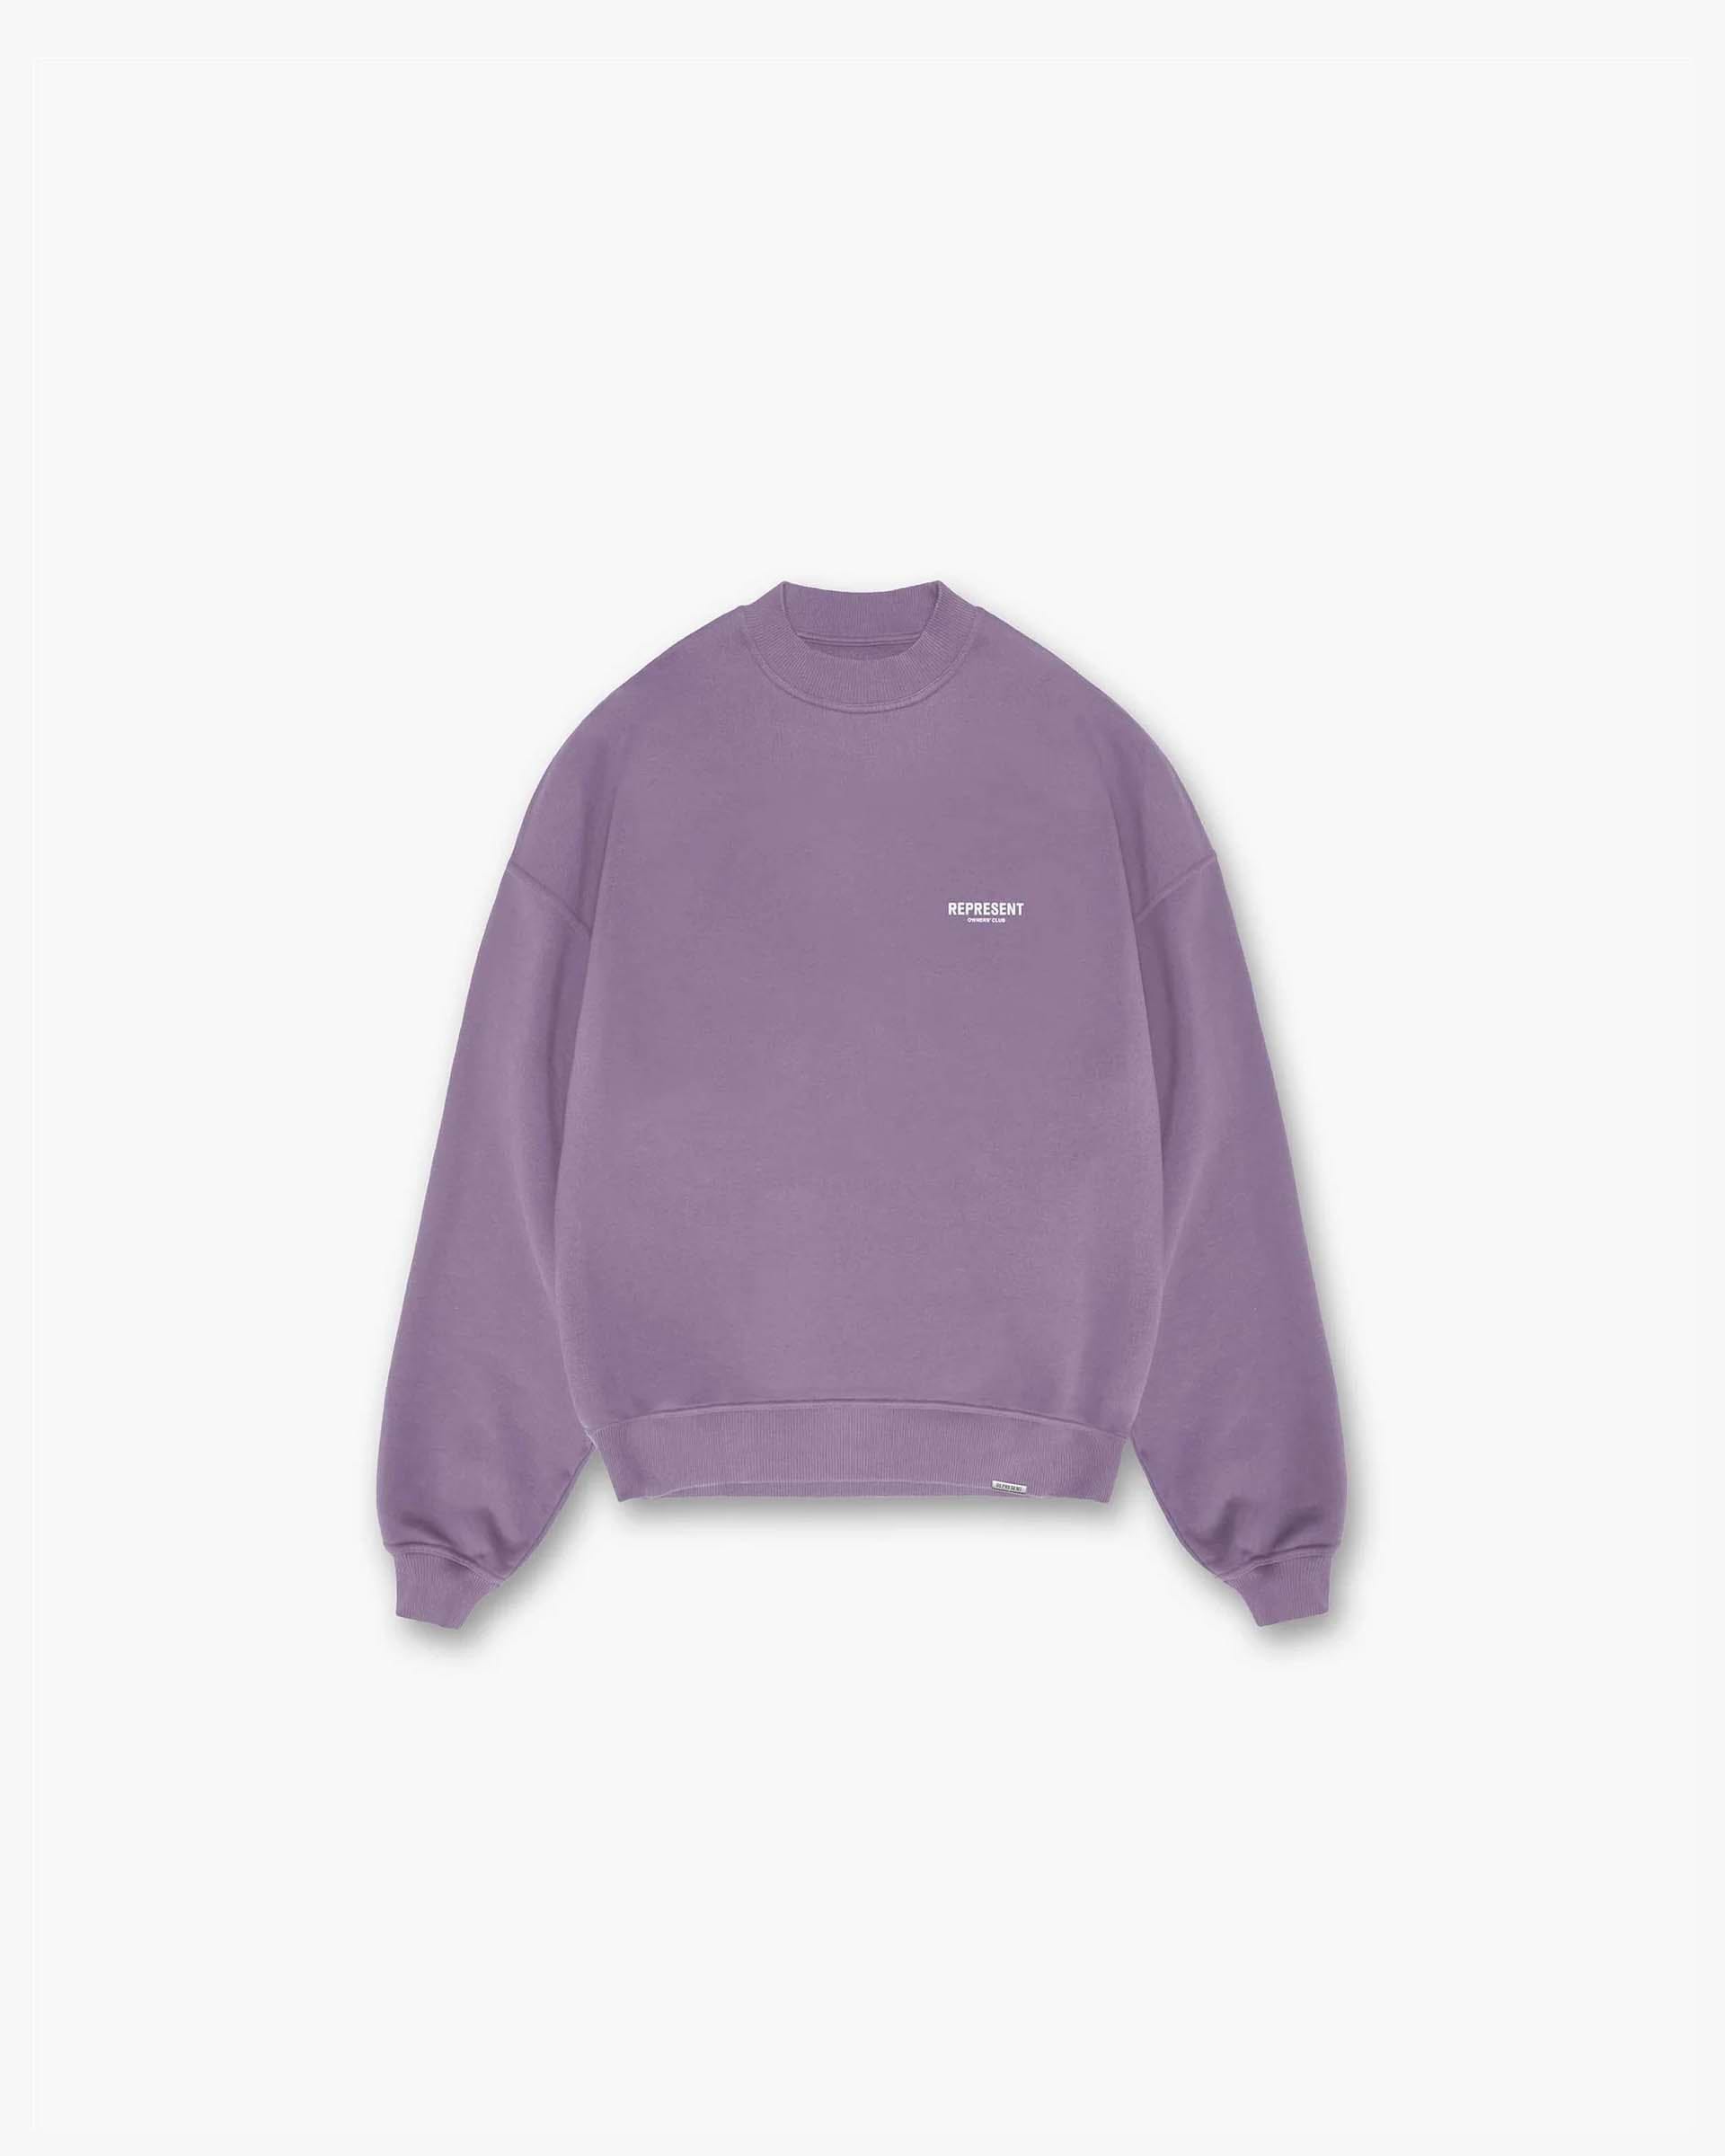 Represent Owners Club Sweater - Vintage Violet